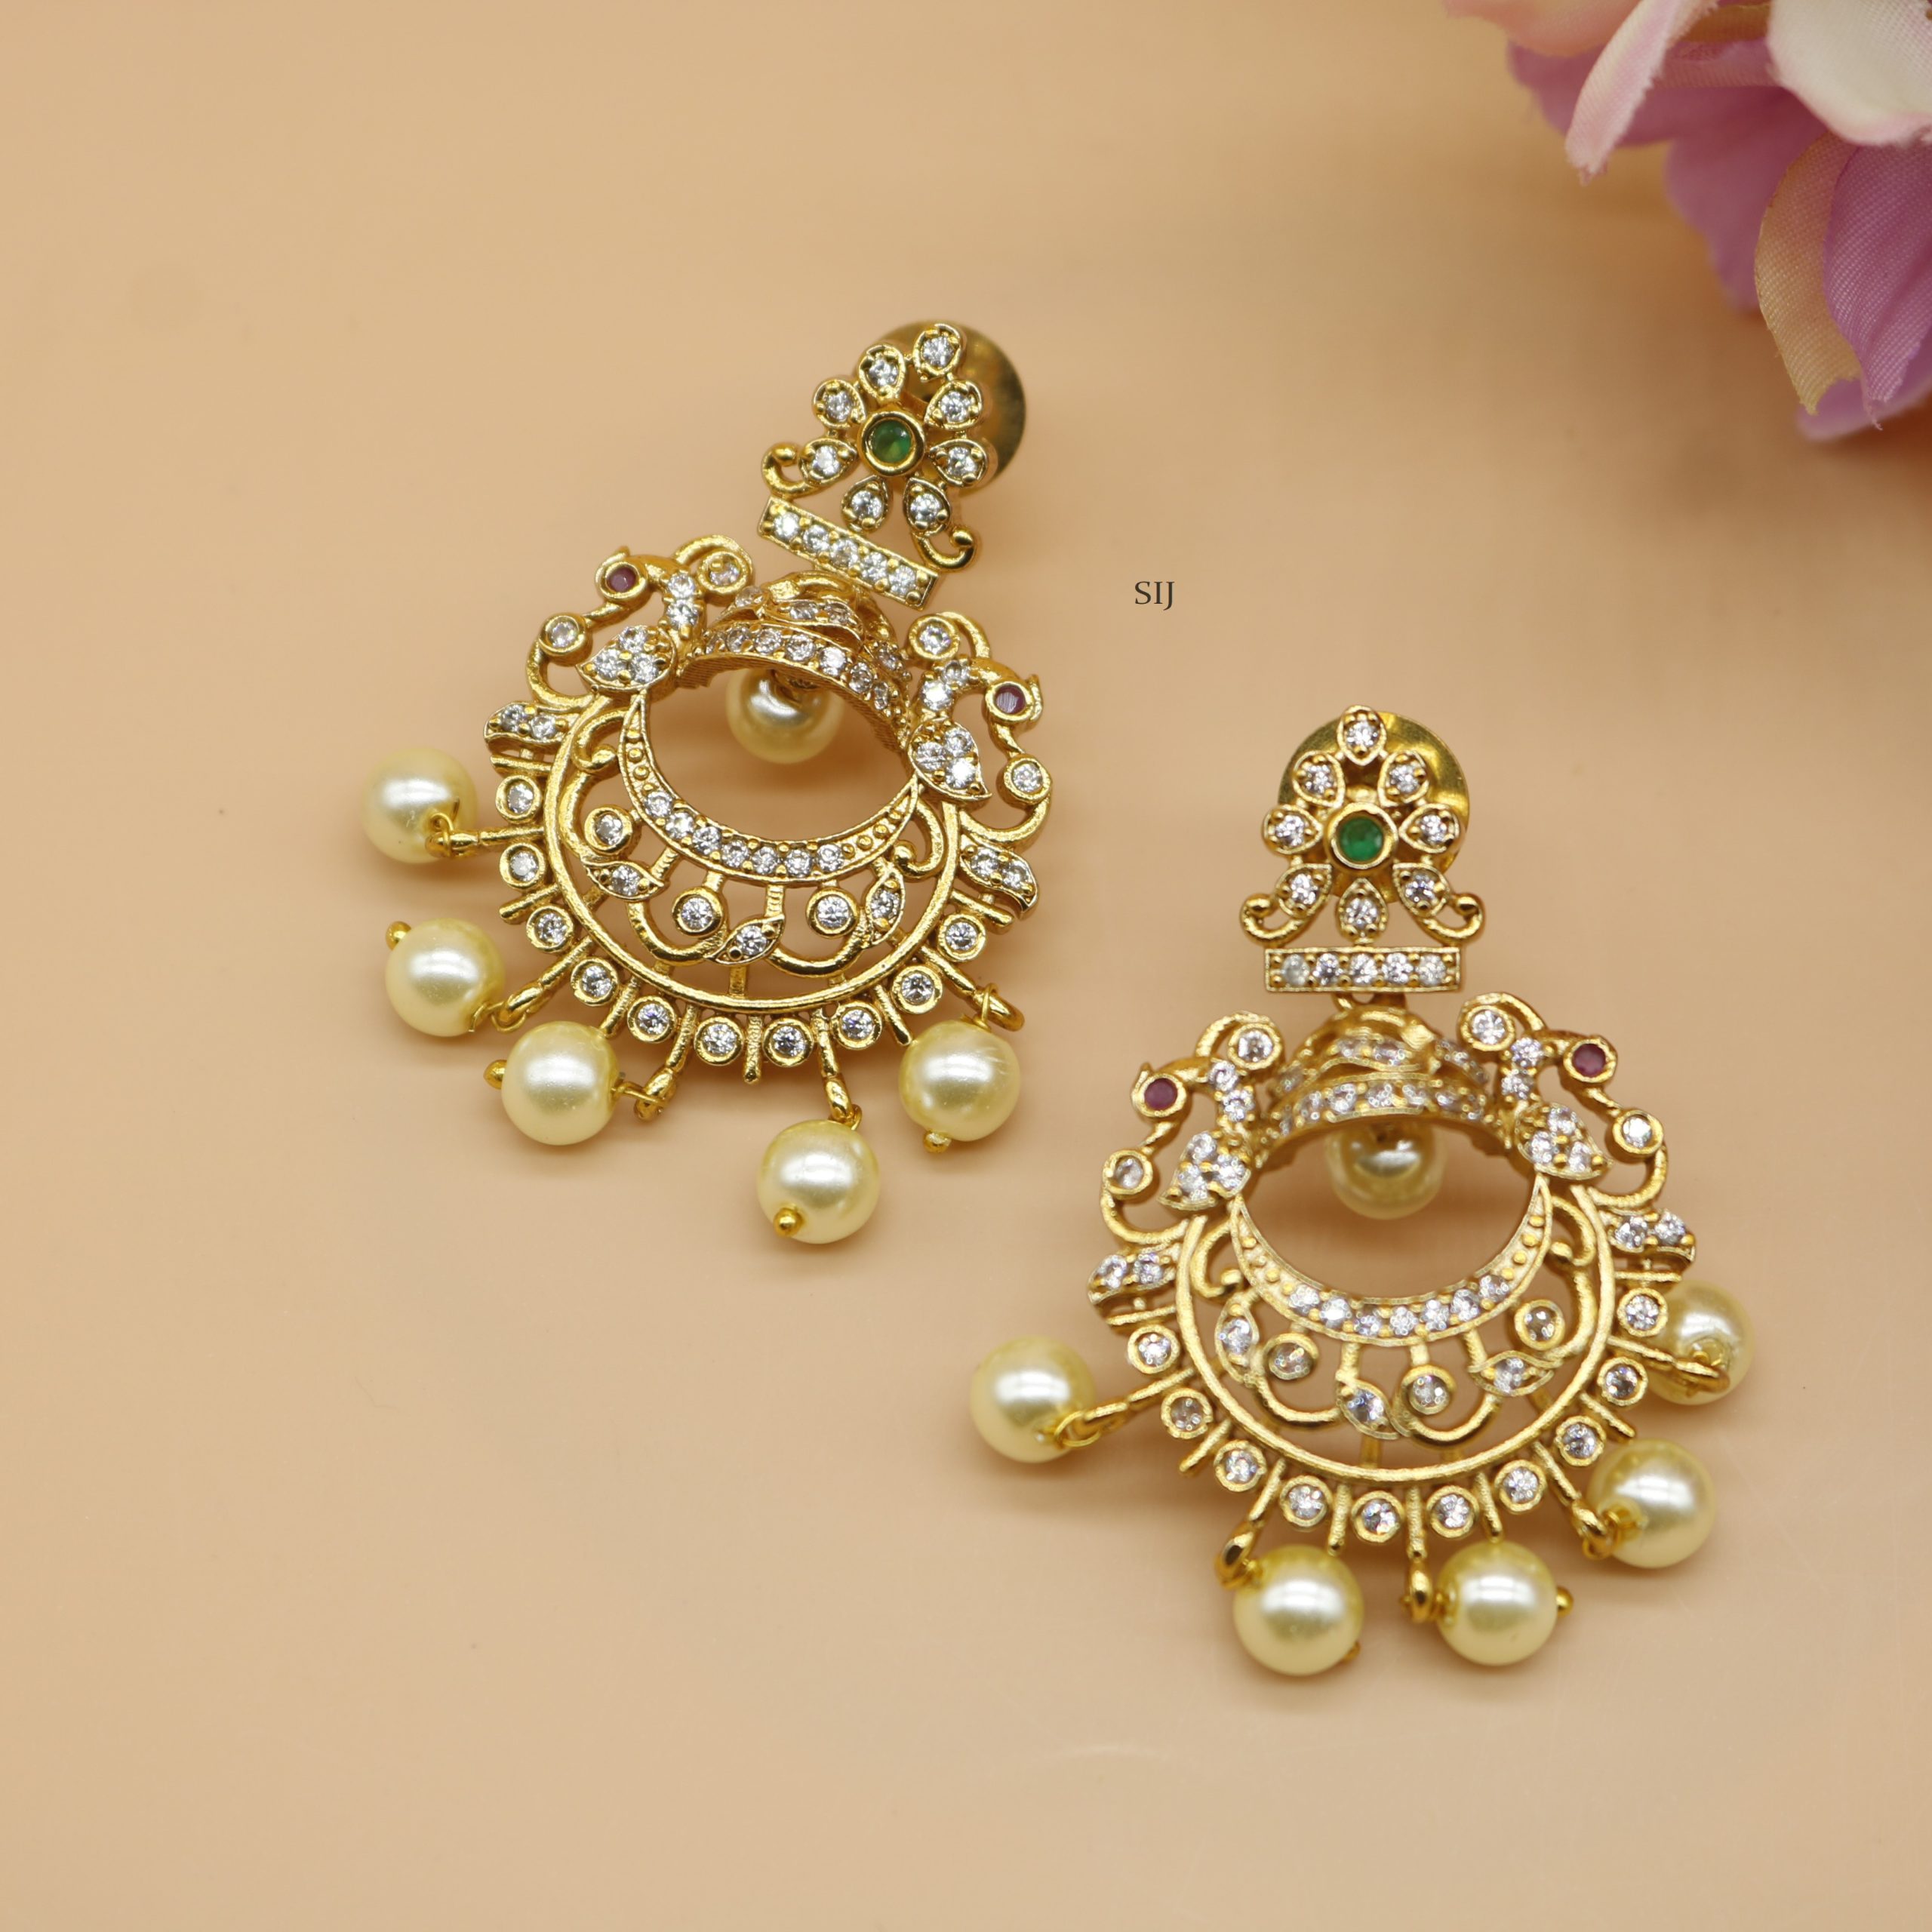 Gorgeous Chand Bali Pearls Earrings